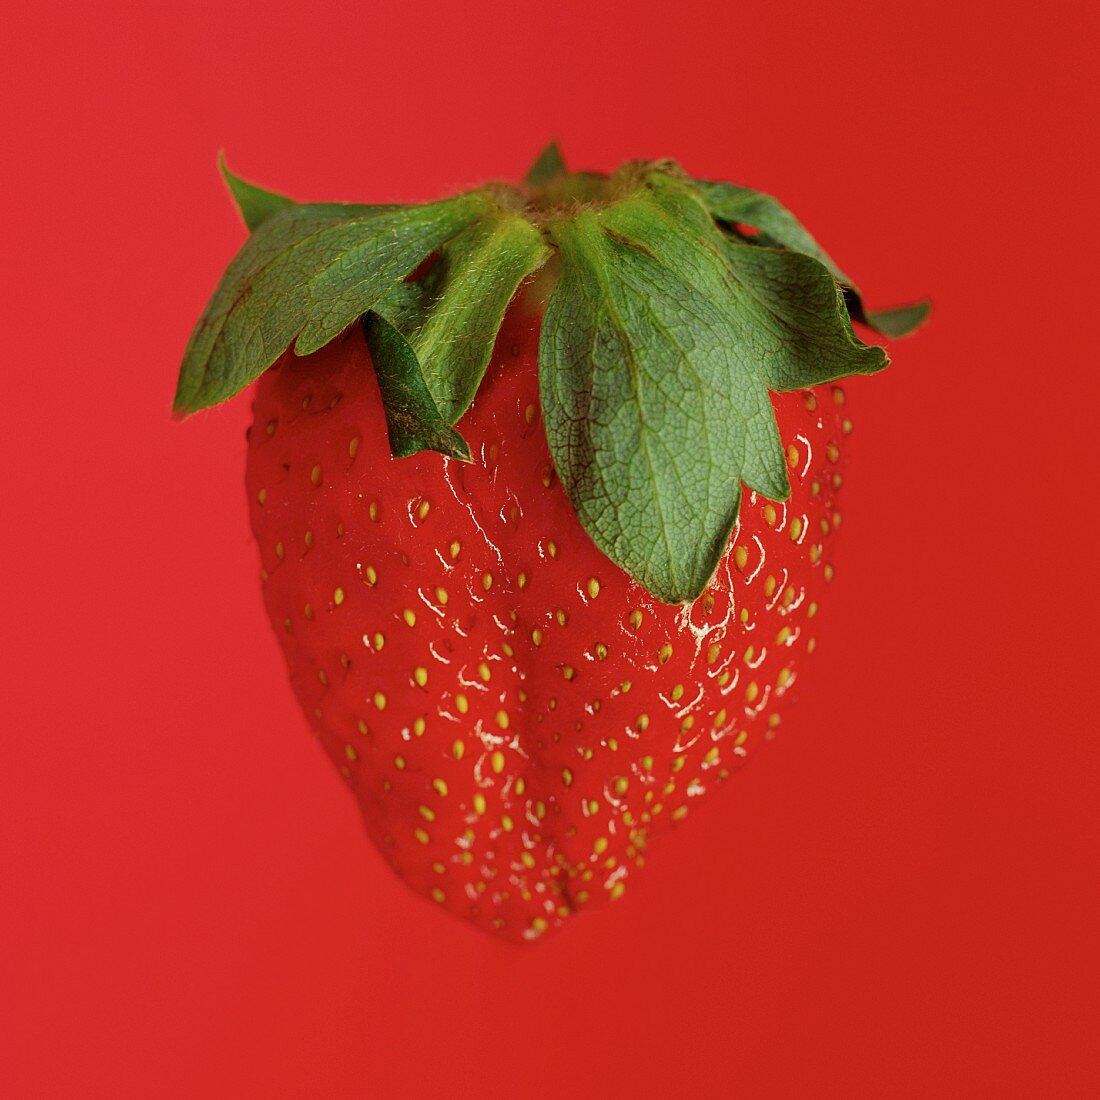 One strawberry against red background